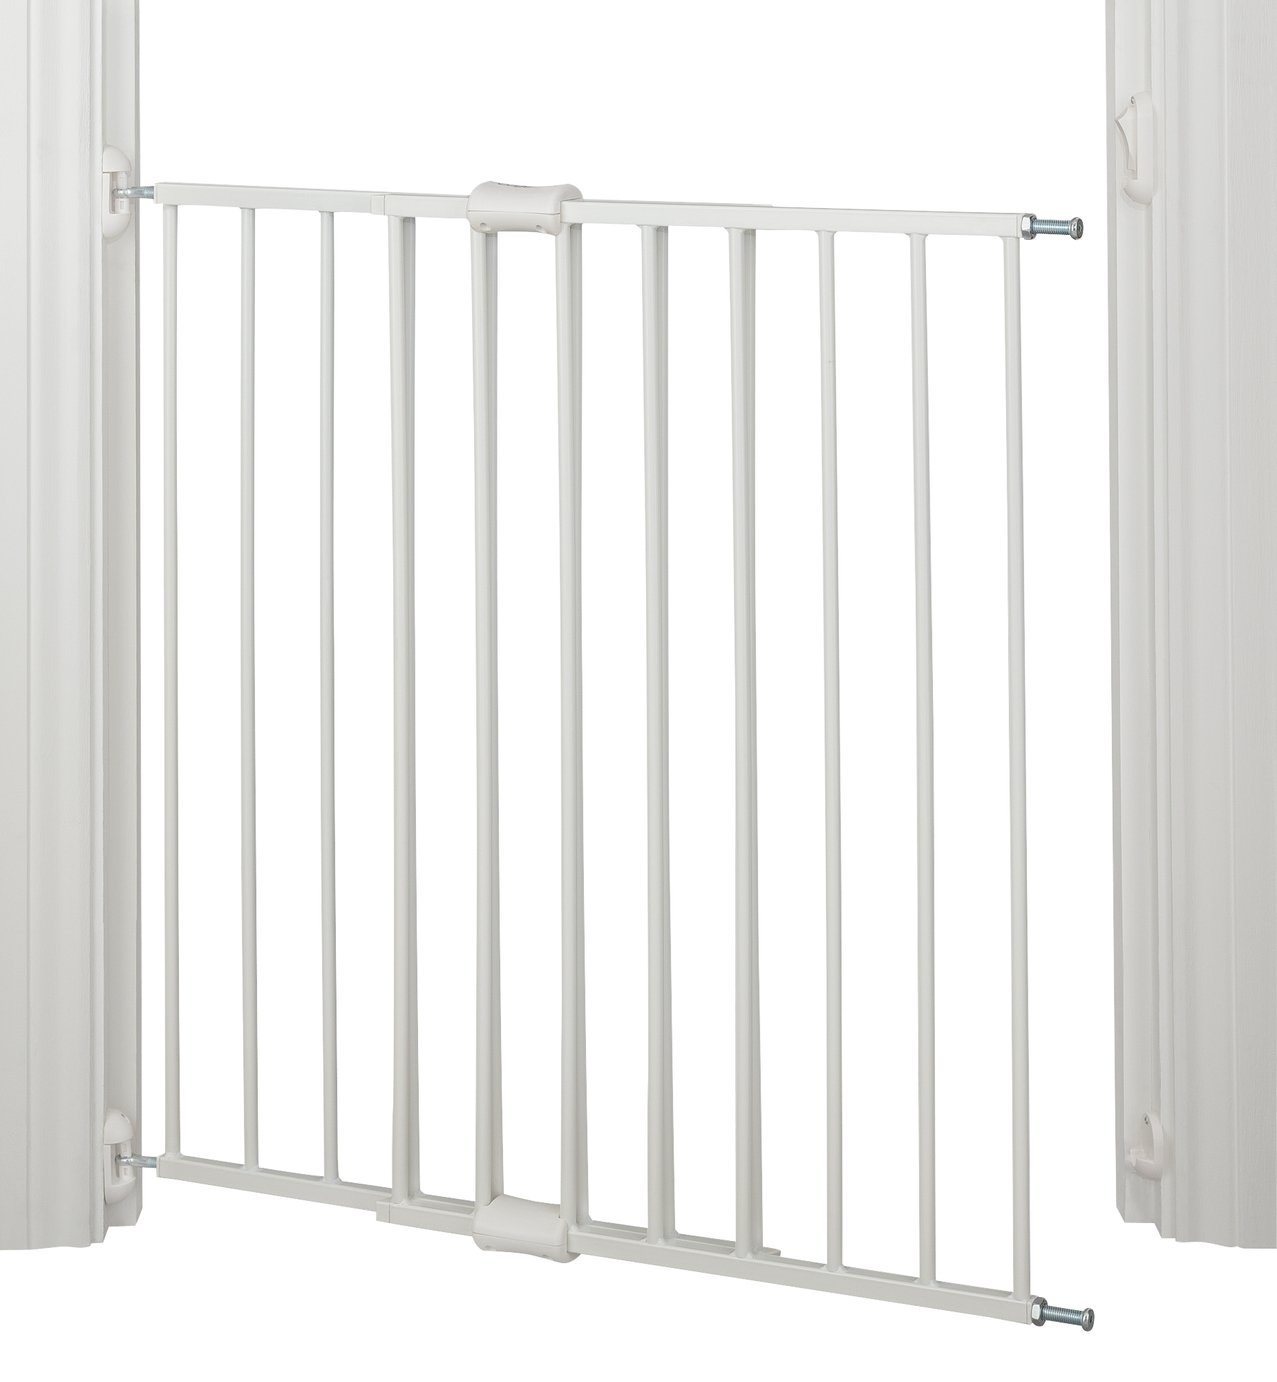 Cuggl Wall Fix Extending Safety Gate Review